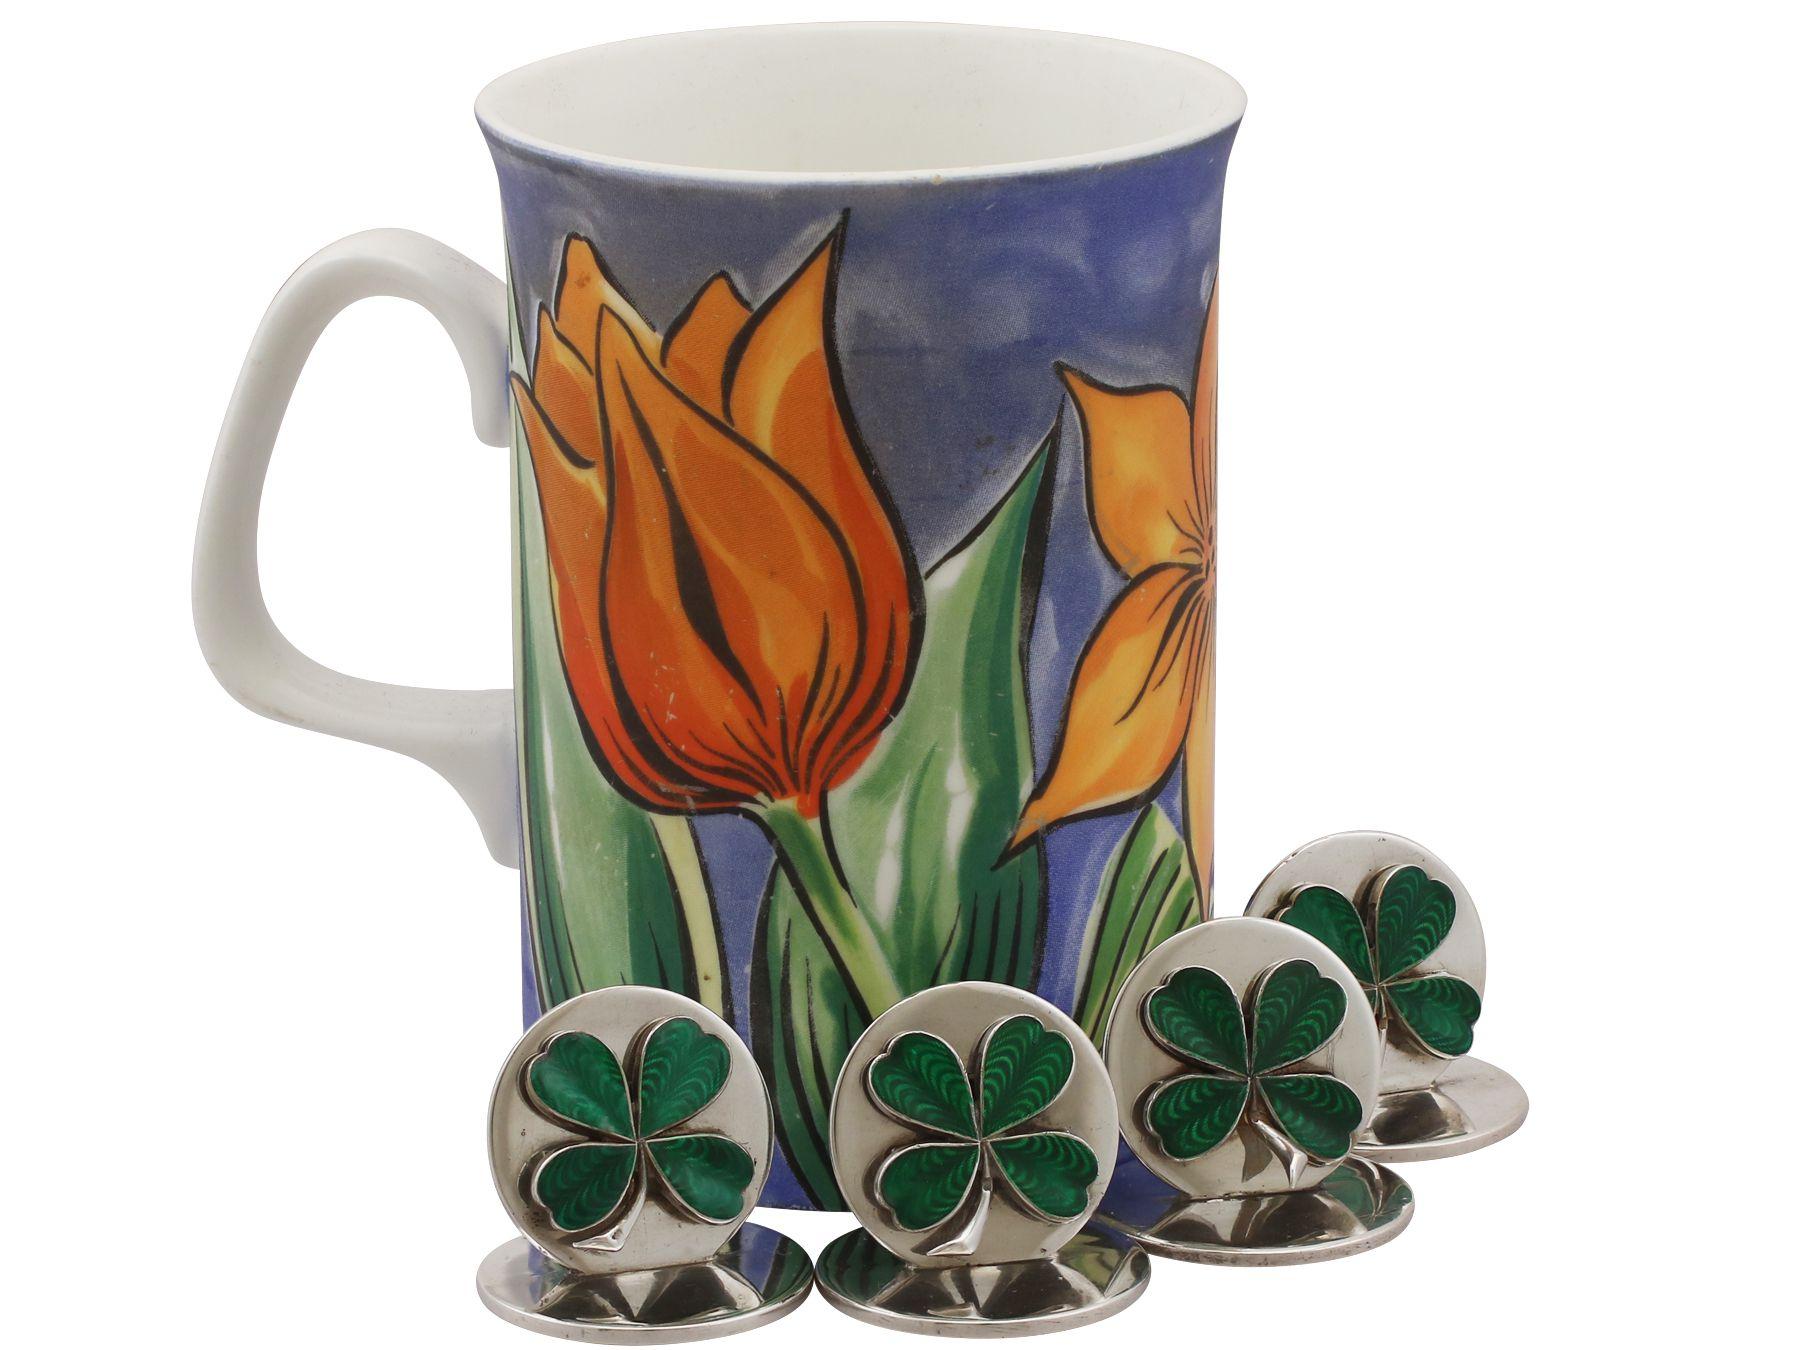 An exceptional, fine and impressive set of four antique George V English sterling silver and enamel four-leaf clover menu / card holders; an addition to our diverse dining silverware collection.

These exceptional antique menu holders, in sterling